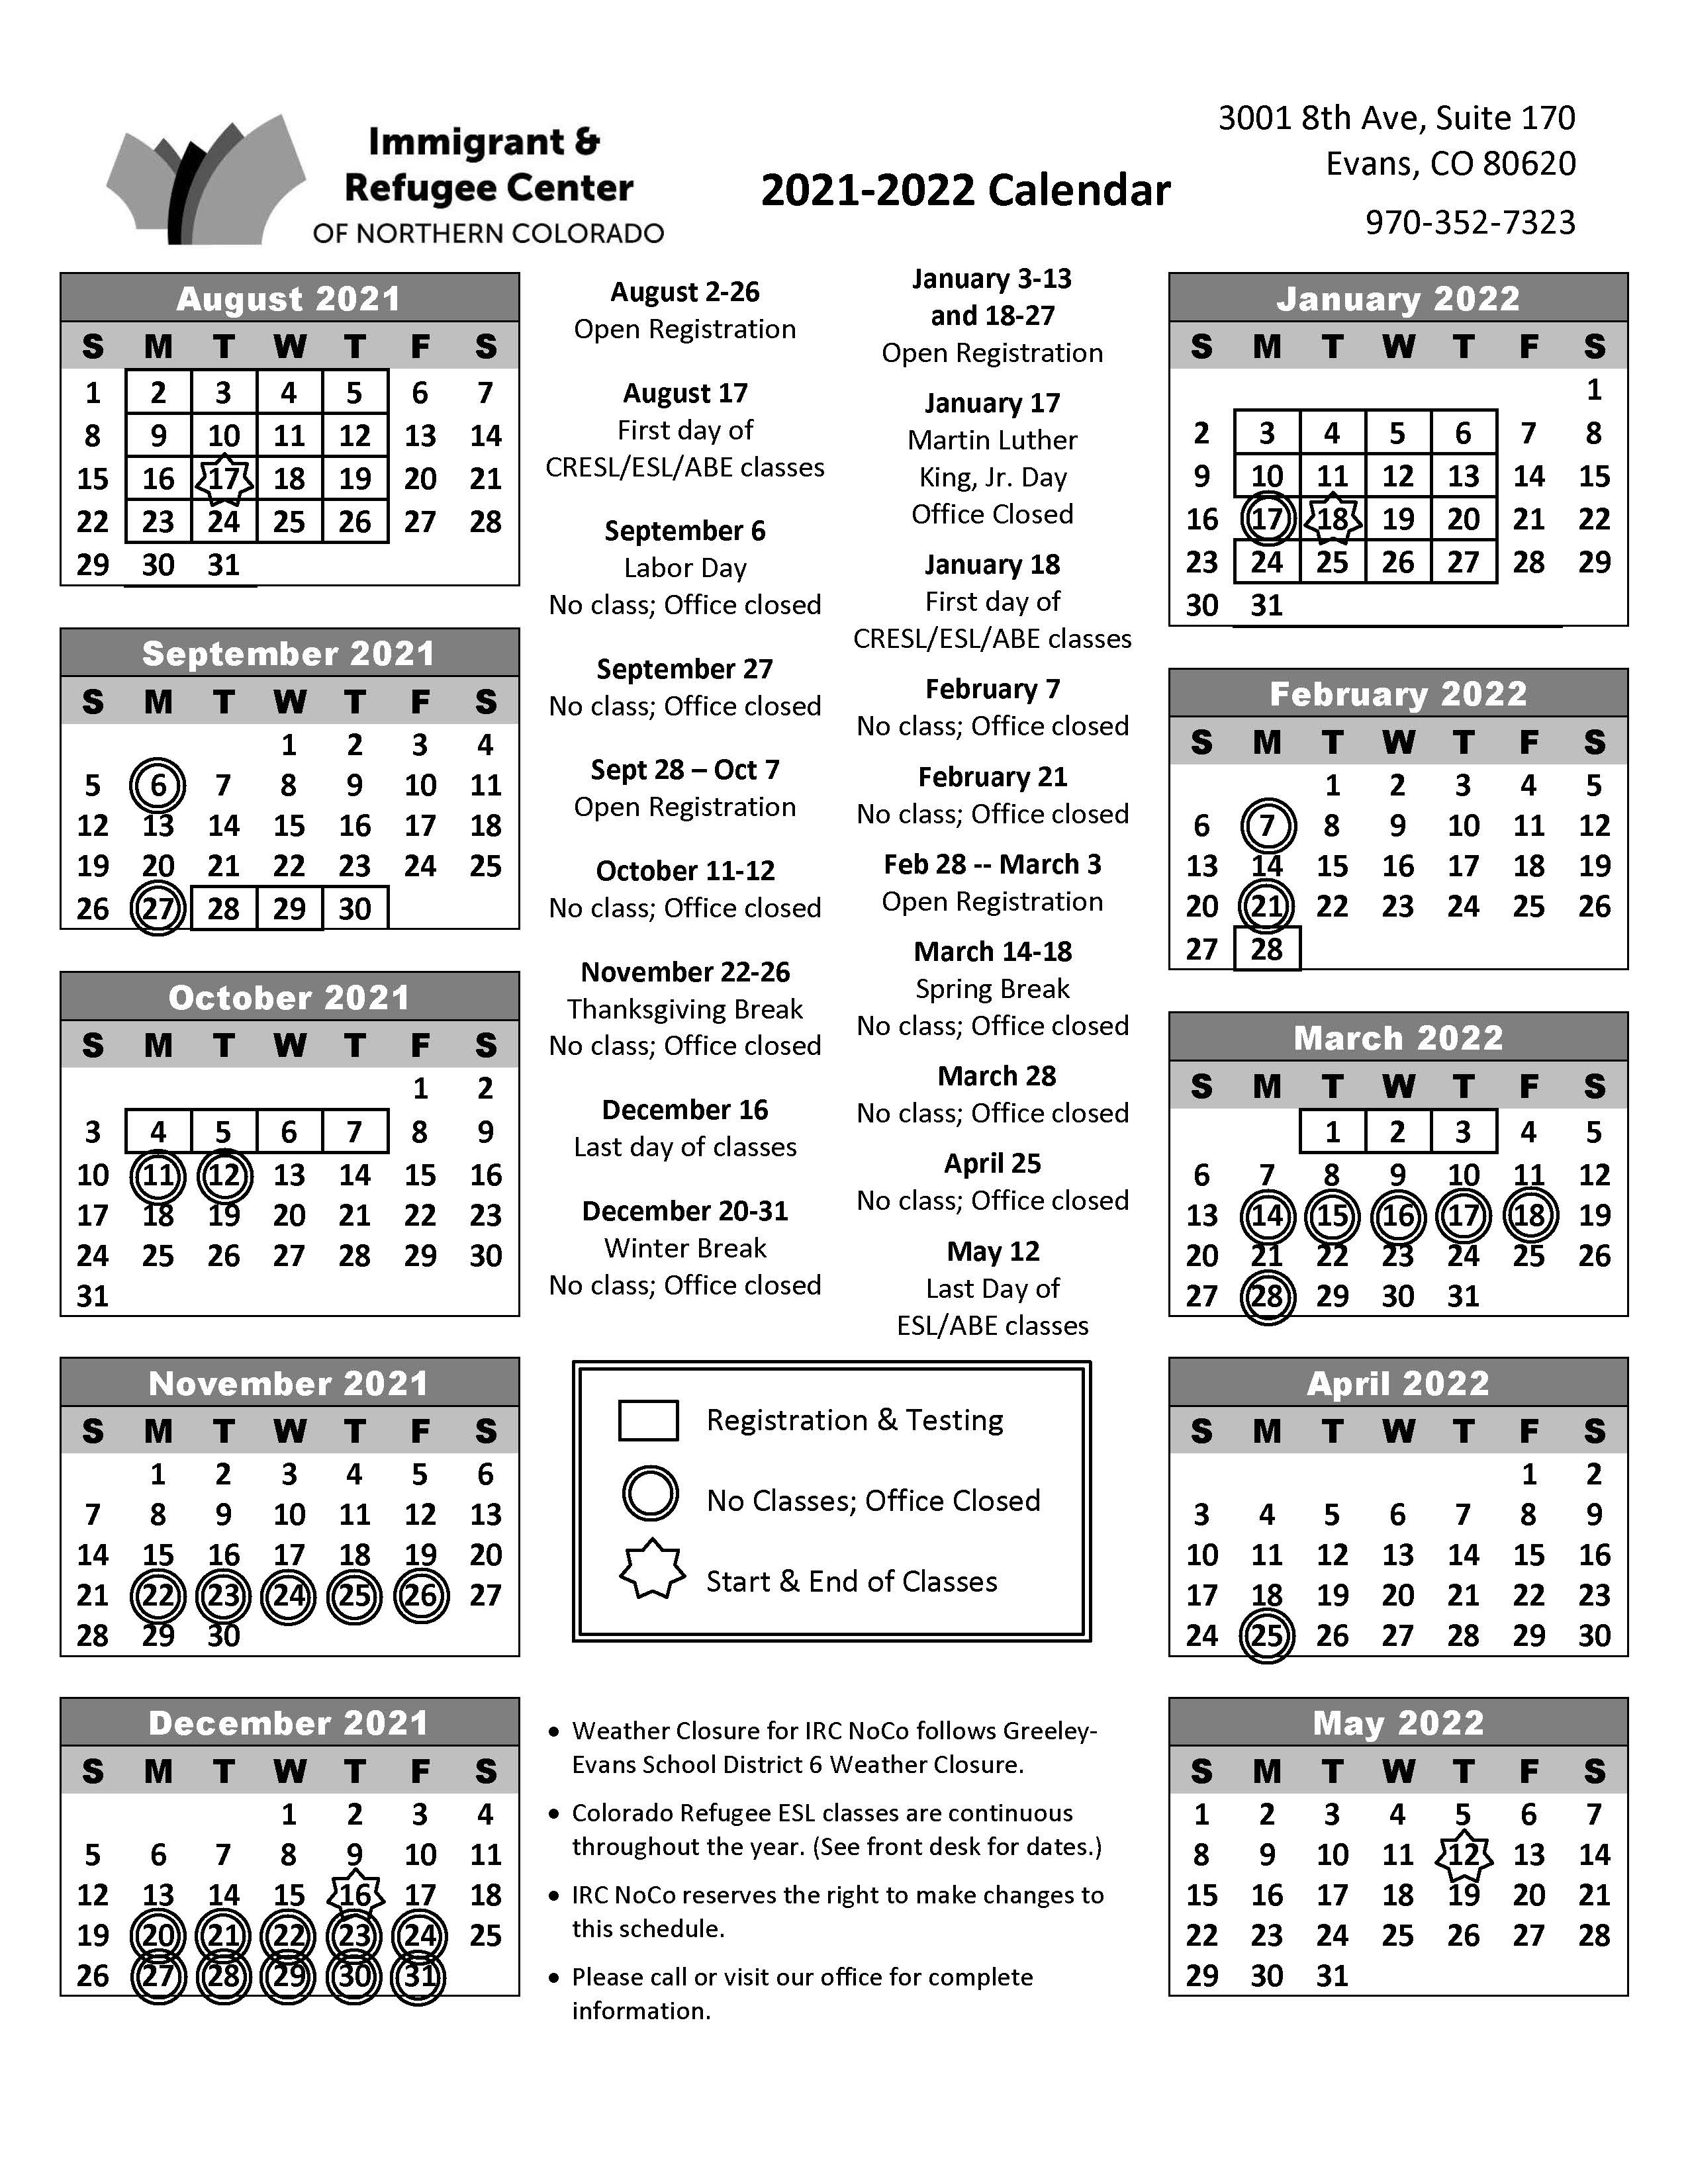 Colorado State University Calendar 2022 Calendars & Schedules — Immigrant And Refugee Center Of Northern Colorado